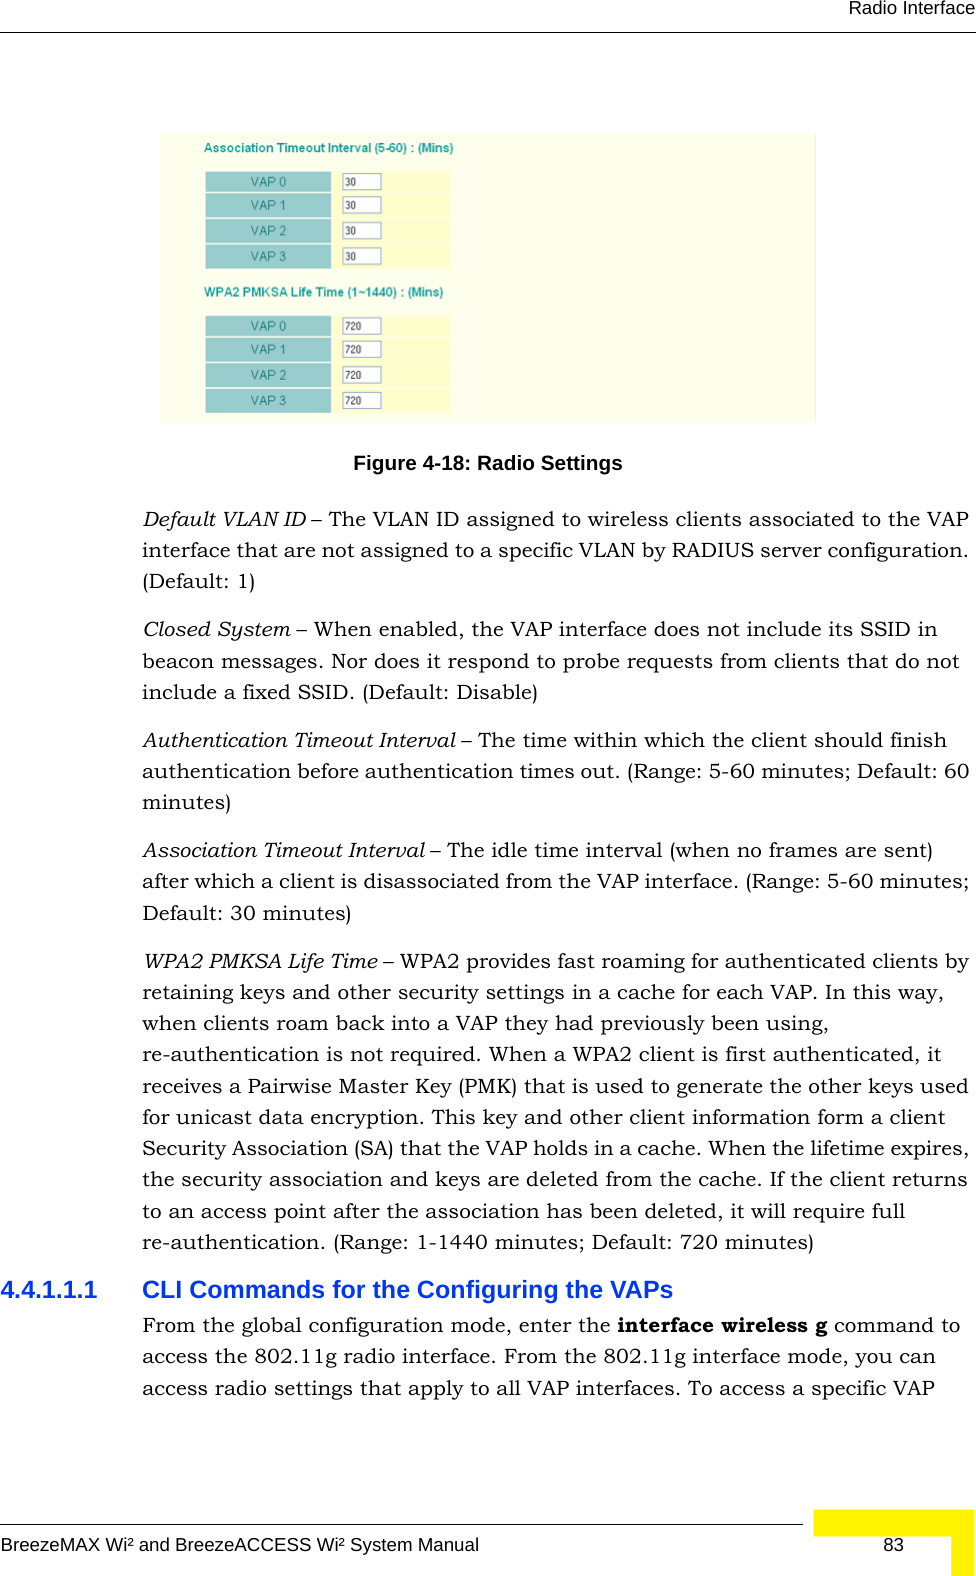 Radio InterfaceBreezeMAX Wi² and BreezeACCESS Wi² System Manual  83Default VLAN ID – The VLAN ID assigned to wireless clients associated to the VAP interface that are not assigned to a specific VLAN by RADIUS server configuration. (Default: 1)Closed System – When enabled, the VAP interface does not include its SSID in beacon messages. Nor does it respond to probe requests from clients that do not include a fixed SSID. (Default: Disable)Authentication Timeout Interval – The time within which the client should finish authentication before authentication times out. (Range: 5-60 minutes; Default: 60 minutes)Association Timeout Interval – The idle time interval (when no frames are sent) after which a client is disassociated from the VAP interface. (Range: 5-60 minutes; Default: 30 minutes)WPA2 PMKSA Life Time – WPA2 provides fast roaming for authenticated clients by retaining keys and other security settings in a cache for each VAP. In this way, when clients roam back into a VAP they had previously been using, re-authentication is not required. When a WPA2 client is first authenticated, it receives a Pairwise Master Key (PMK) that is used to generate the other keys used for unicast data encryption. This key and other client information form a client Security Association (SA) that the VAP holds in a cache. When the lifetime expires, the security association and keys are deleted from the cache. If the client returns to an access point after the association has been deleted, it will require full re-authentication. (Range: 1-1440 minutes; Default: 720 minutes)4.4.1.1.1 CLI Commands for the Configuring the VAPsFrom the global configuration mode, enter the interface wireless g command to access the 802.11g radio interface. From the 802.11g interface mode, you can access radio settings that apply to all VAP interfaces. To access a specific VAP Figure 4-18: Radio Settings